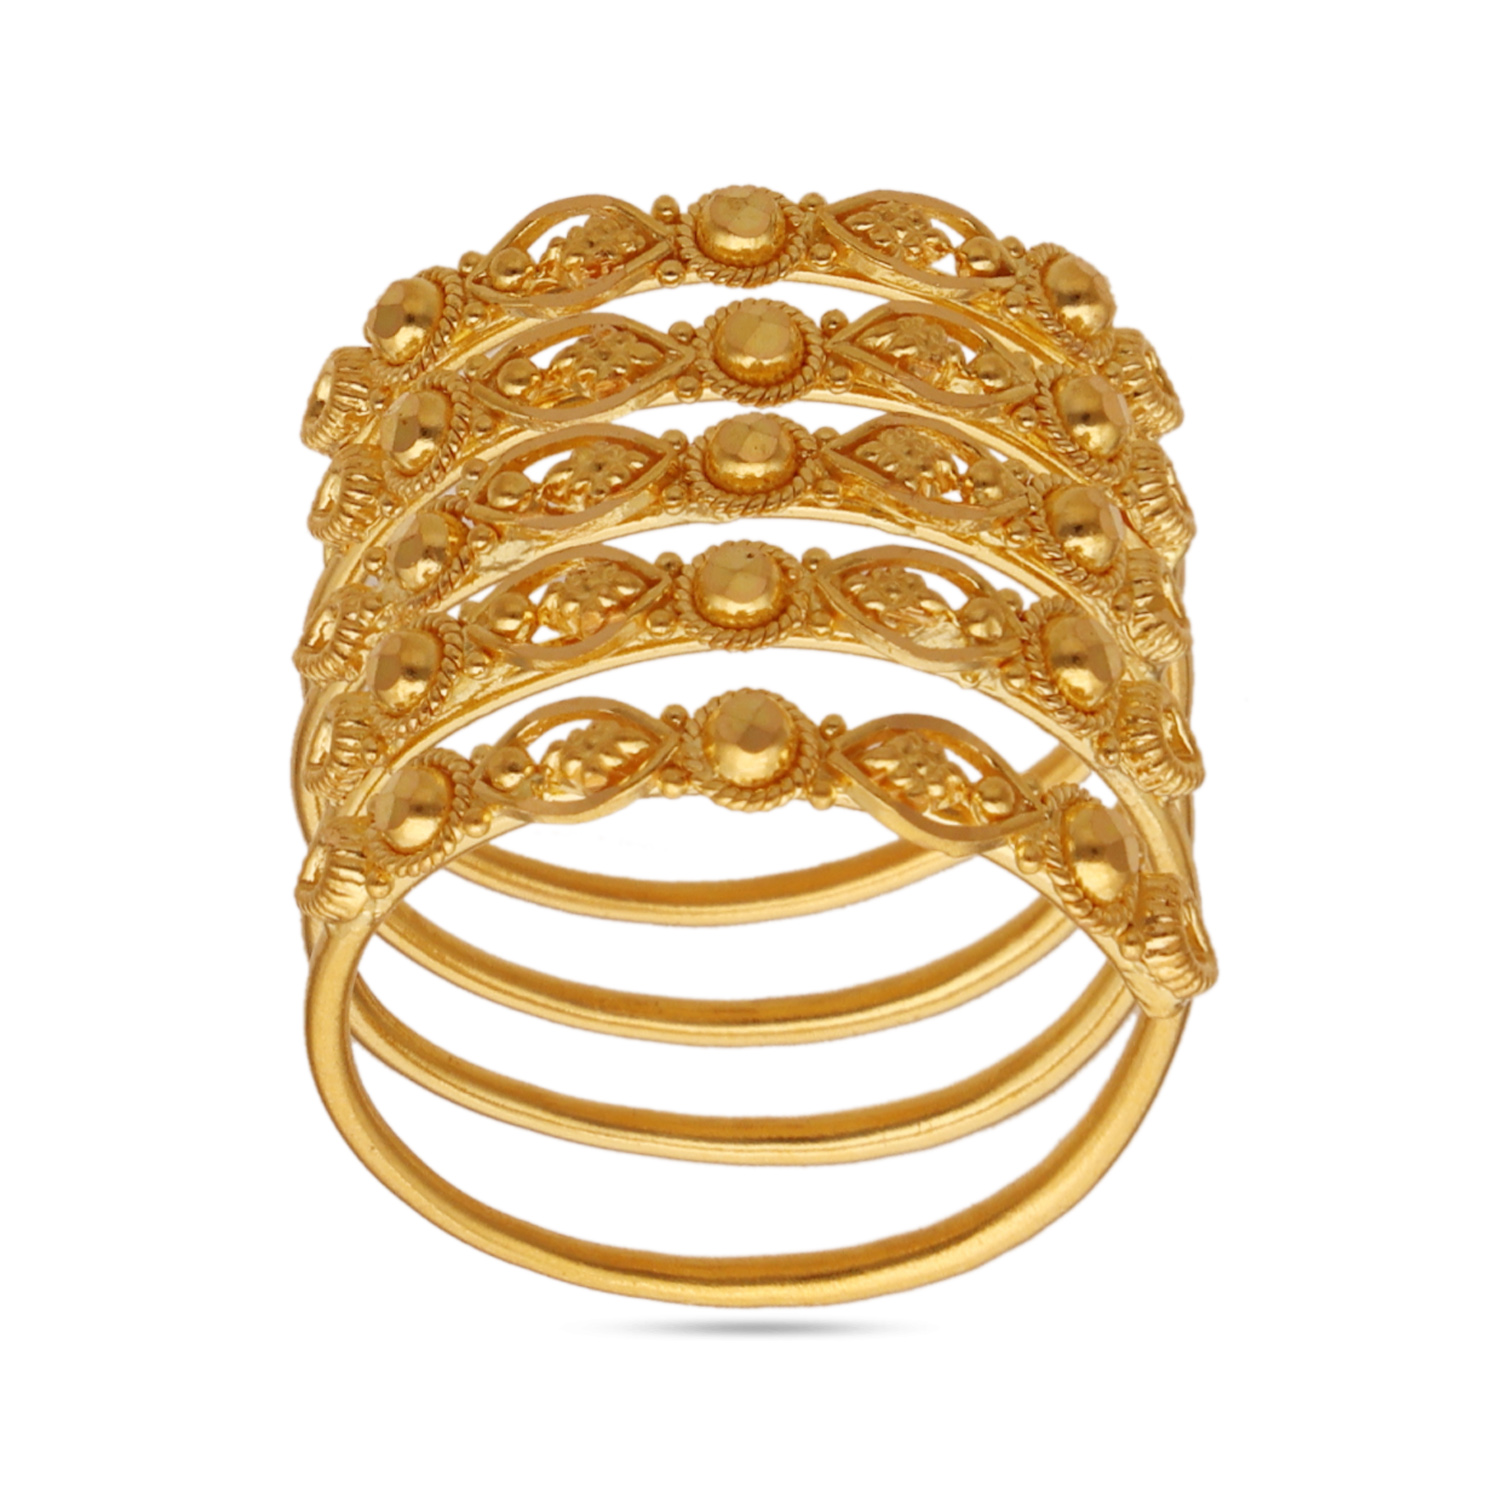 shee aabi jewels bis hallmark gold ring for the woman